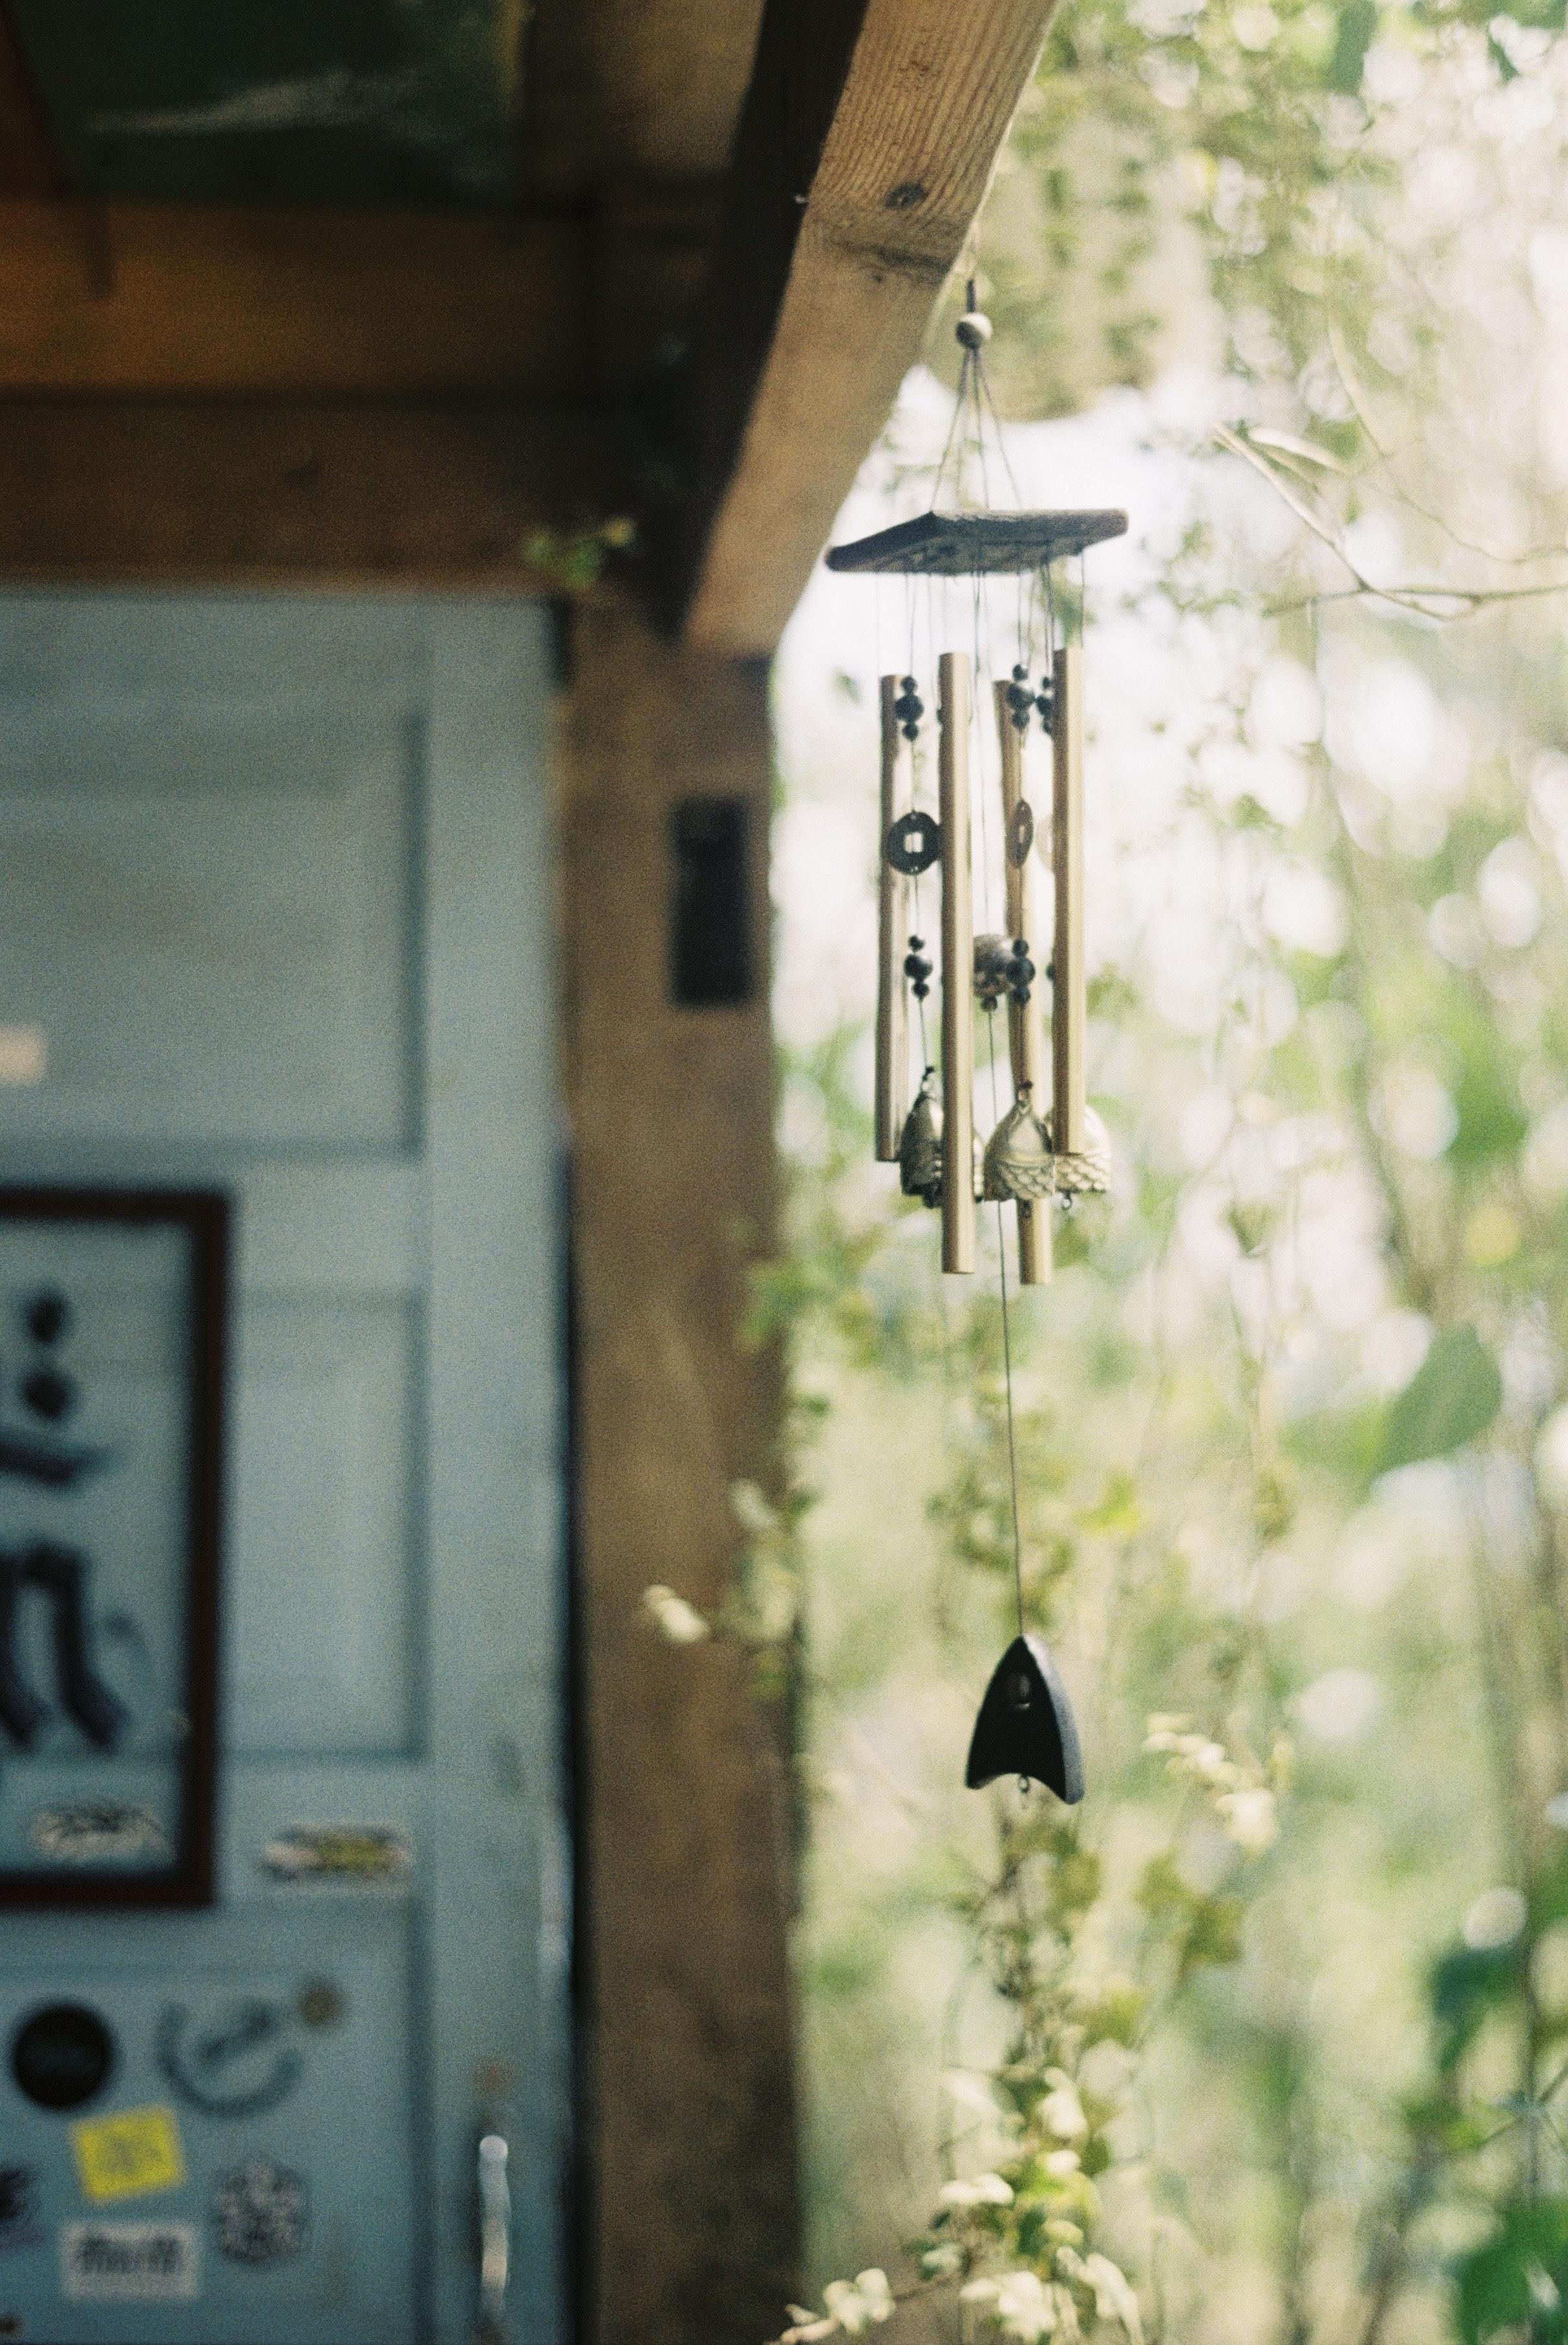  How To Hang Wind Chimes Without Drilling 